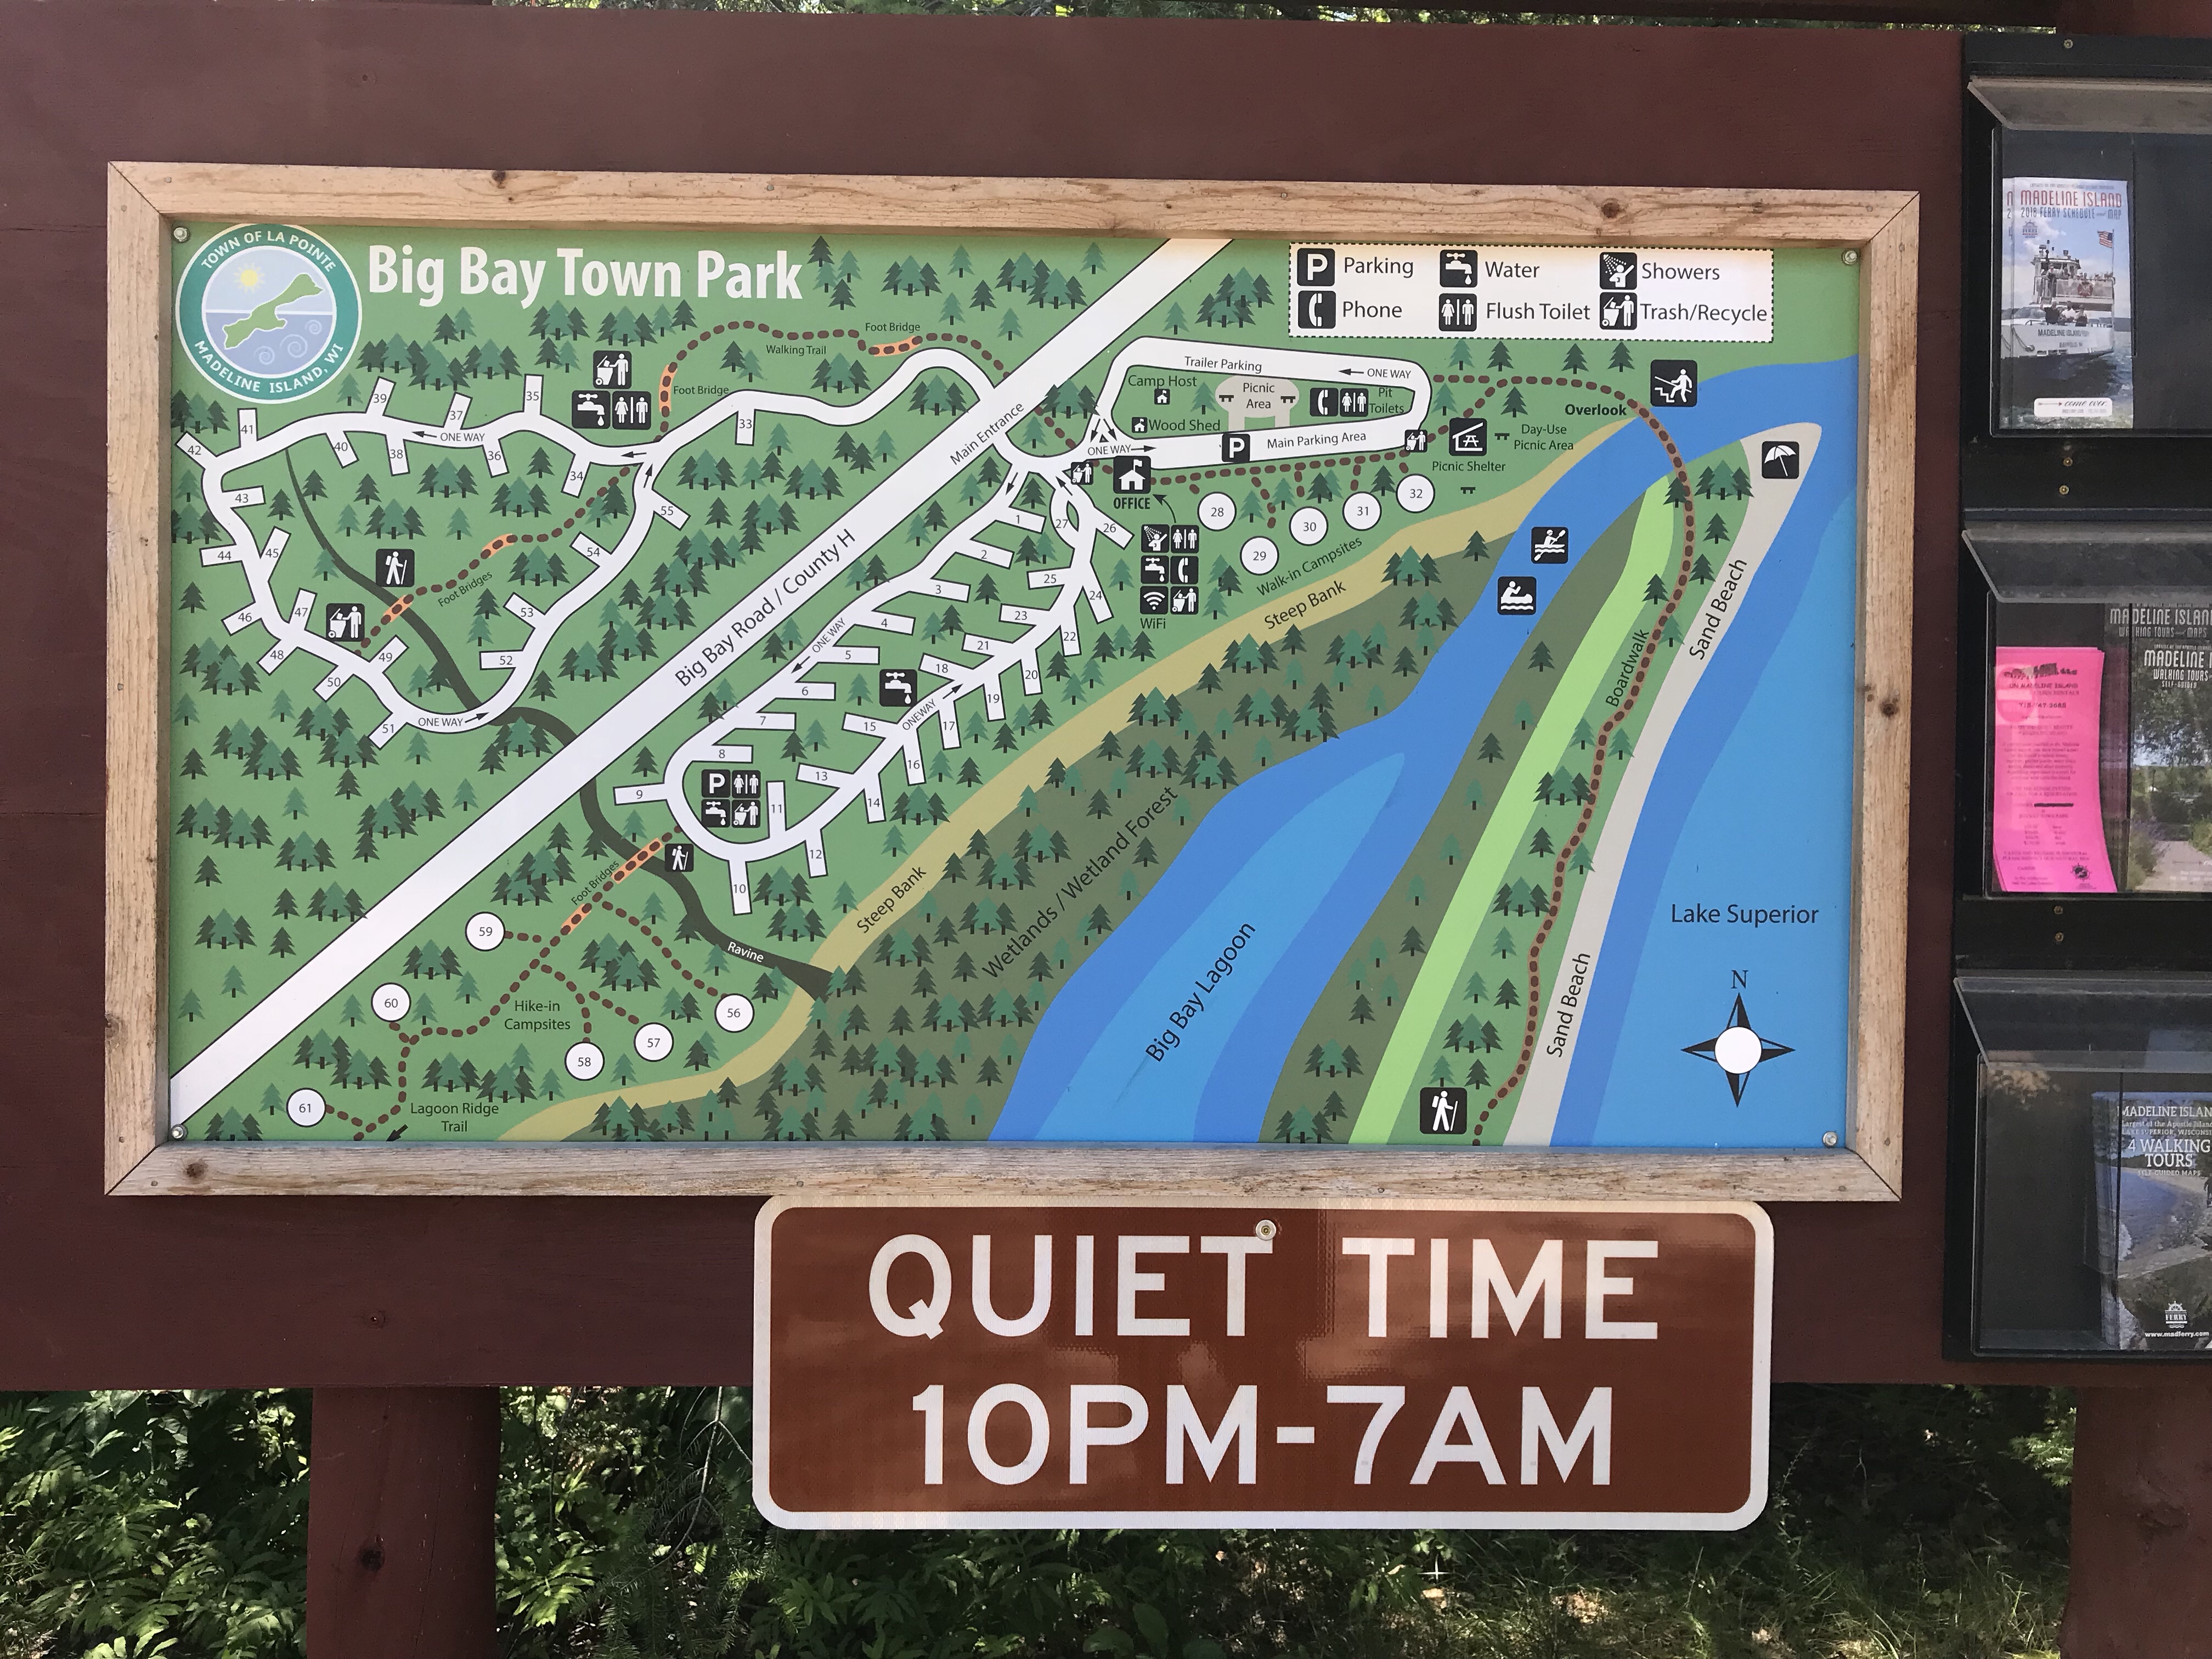 Big Bay Town Park campsite and beach map